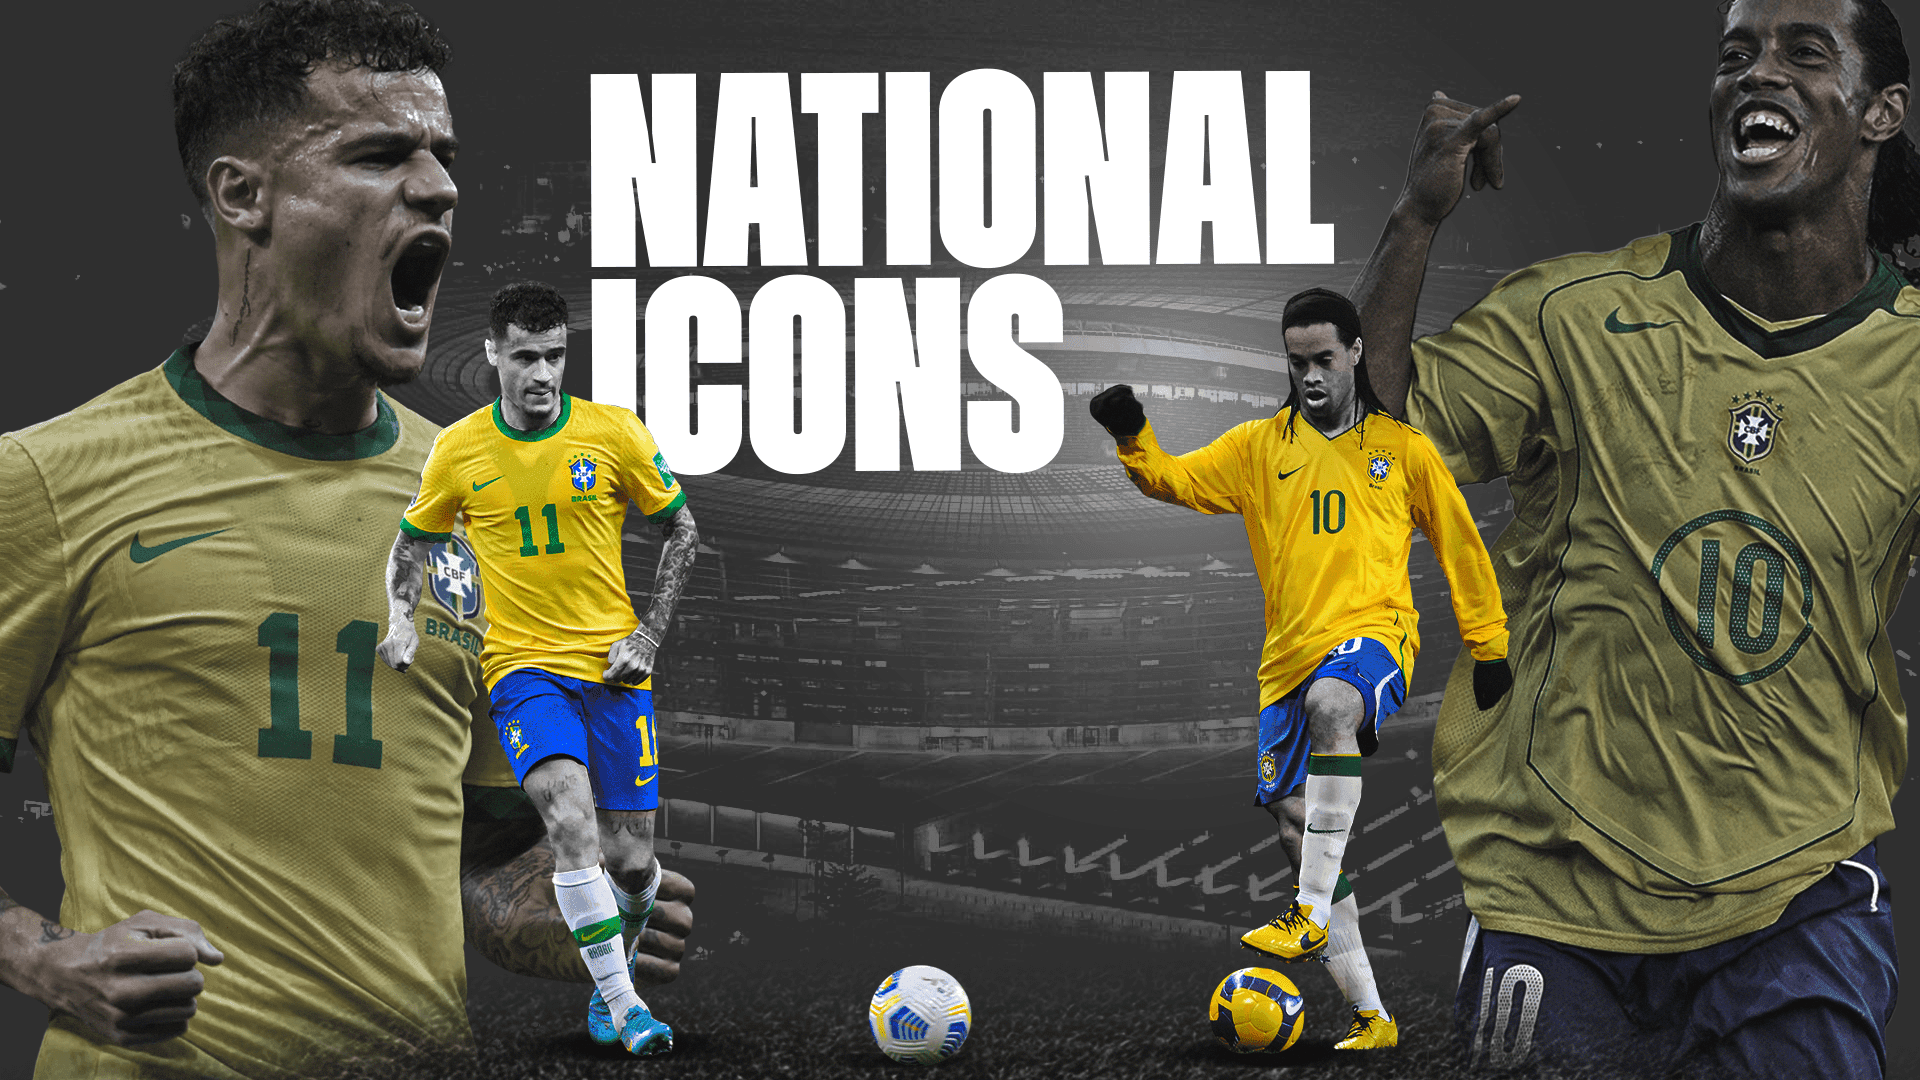 images/National Icons/NewFolder/Football episode .png